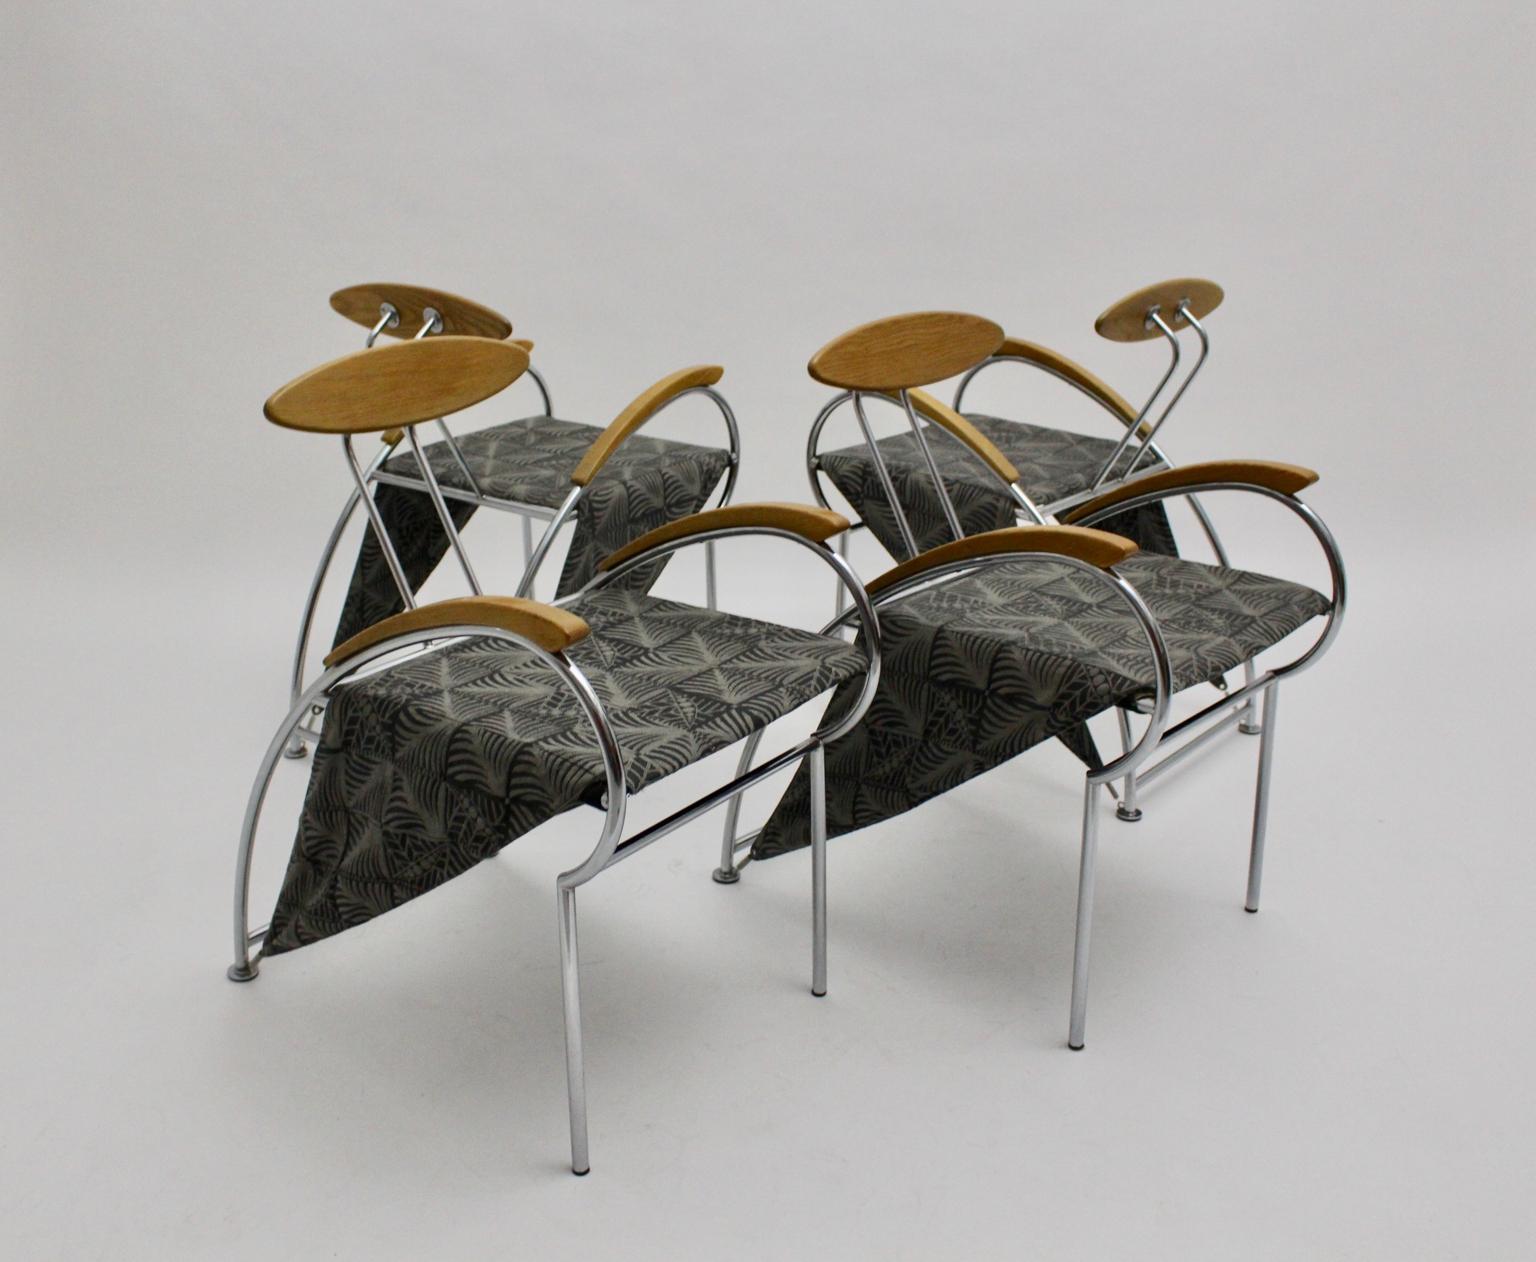 Postmodern Set of Four Vintage Dining Chair Massimo Iosa Ghini Moroso 1988 Italy For Sale 5